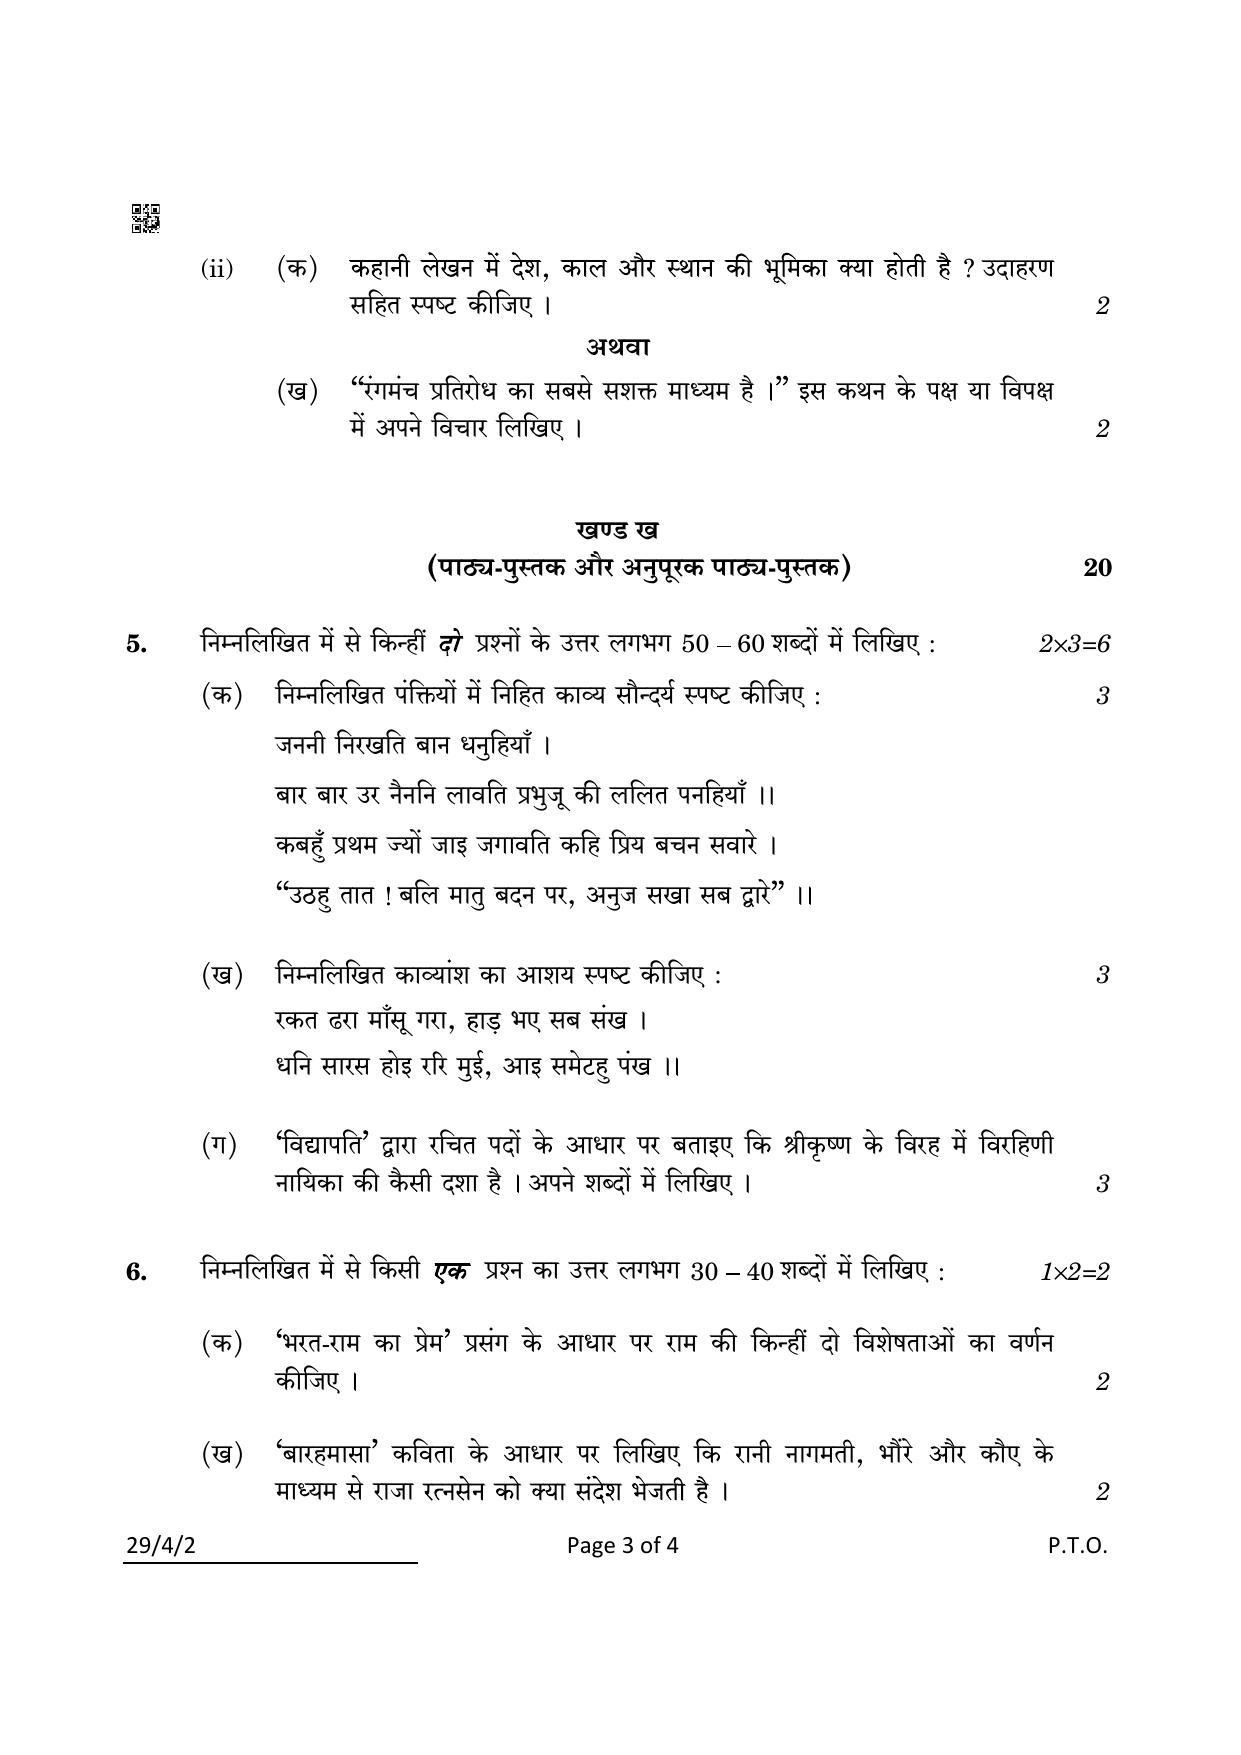 CBSE Class 12 29-4-2 Hindi Elective 2022 Question Paper - Page 3